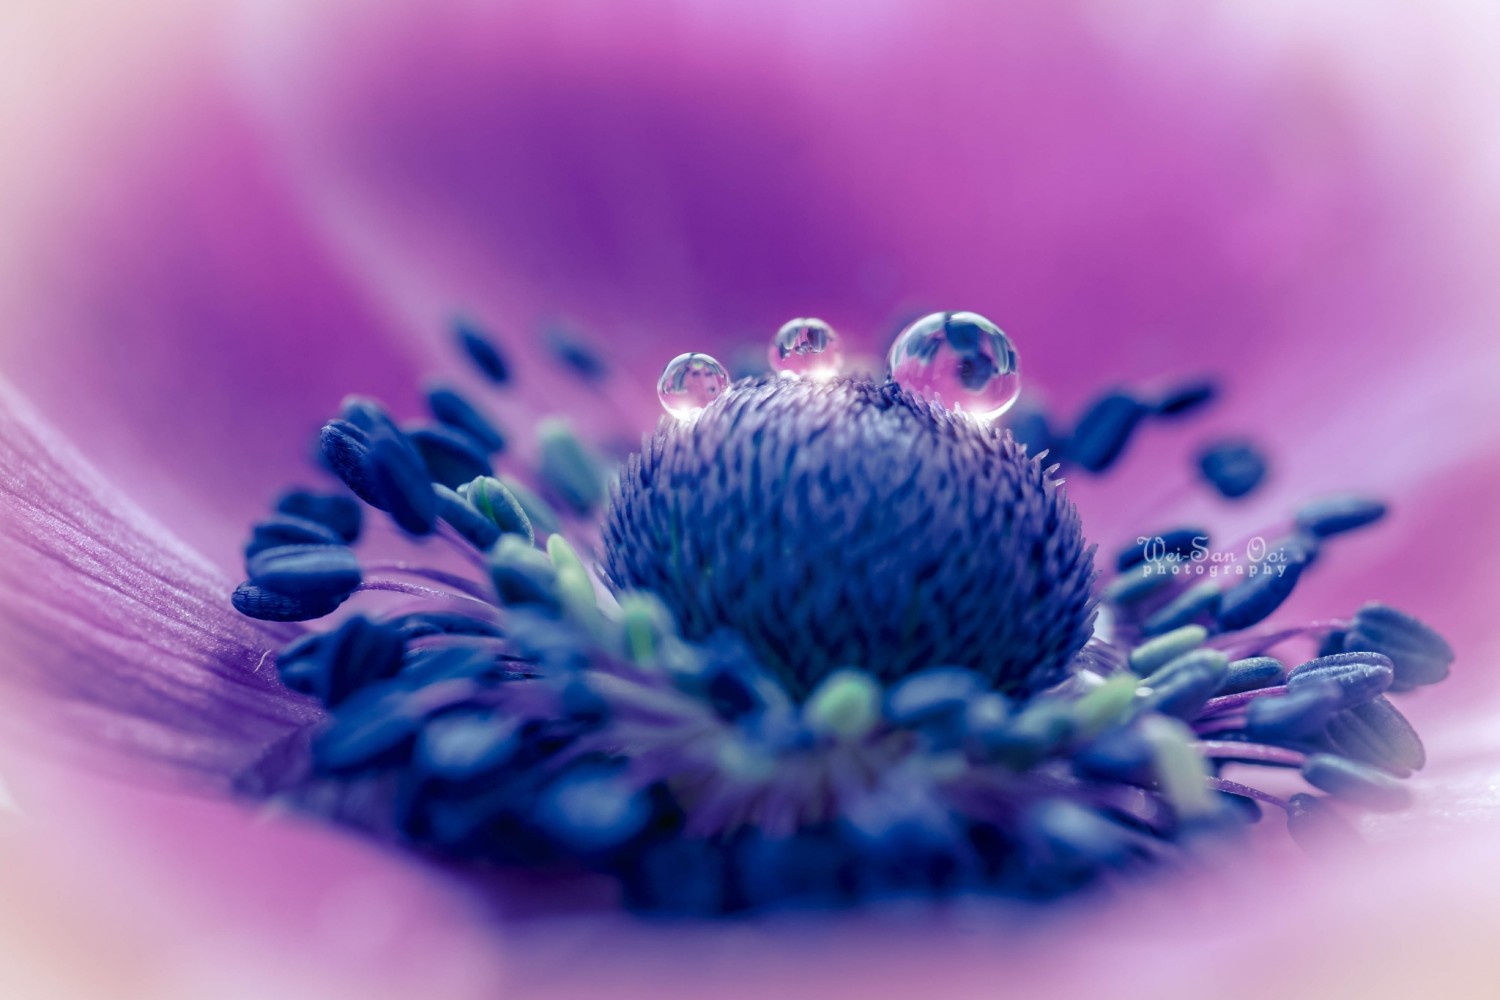 31 Incredibly Captivating Flower Photos by Wei-San Ooi